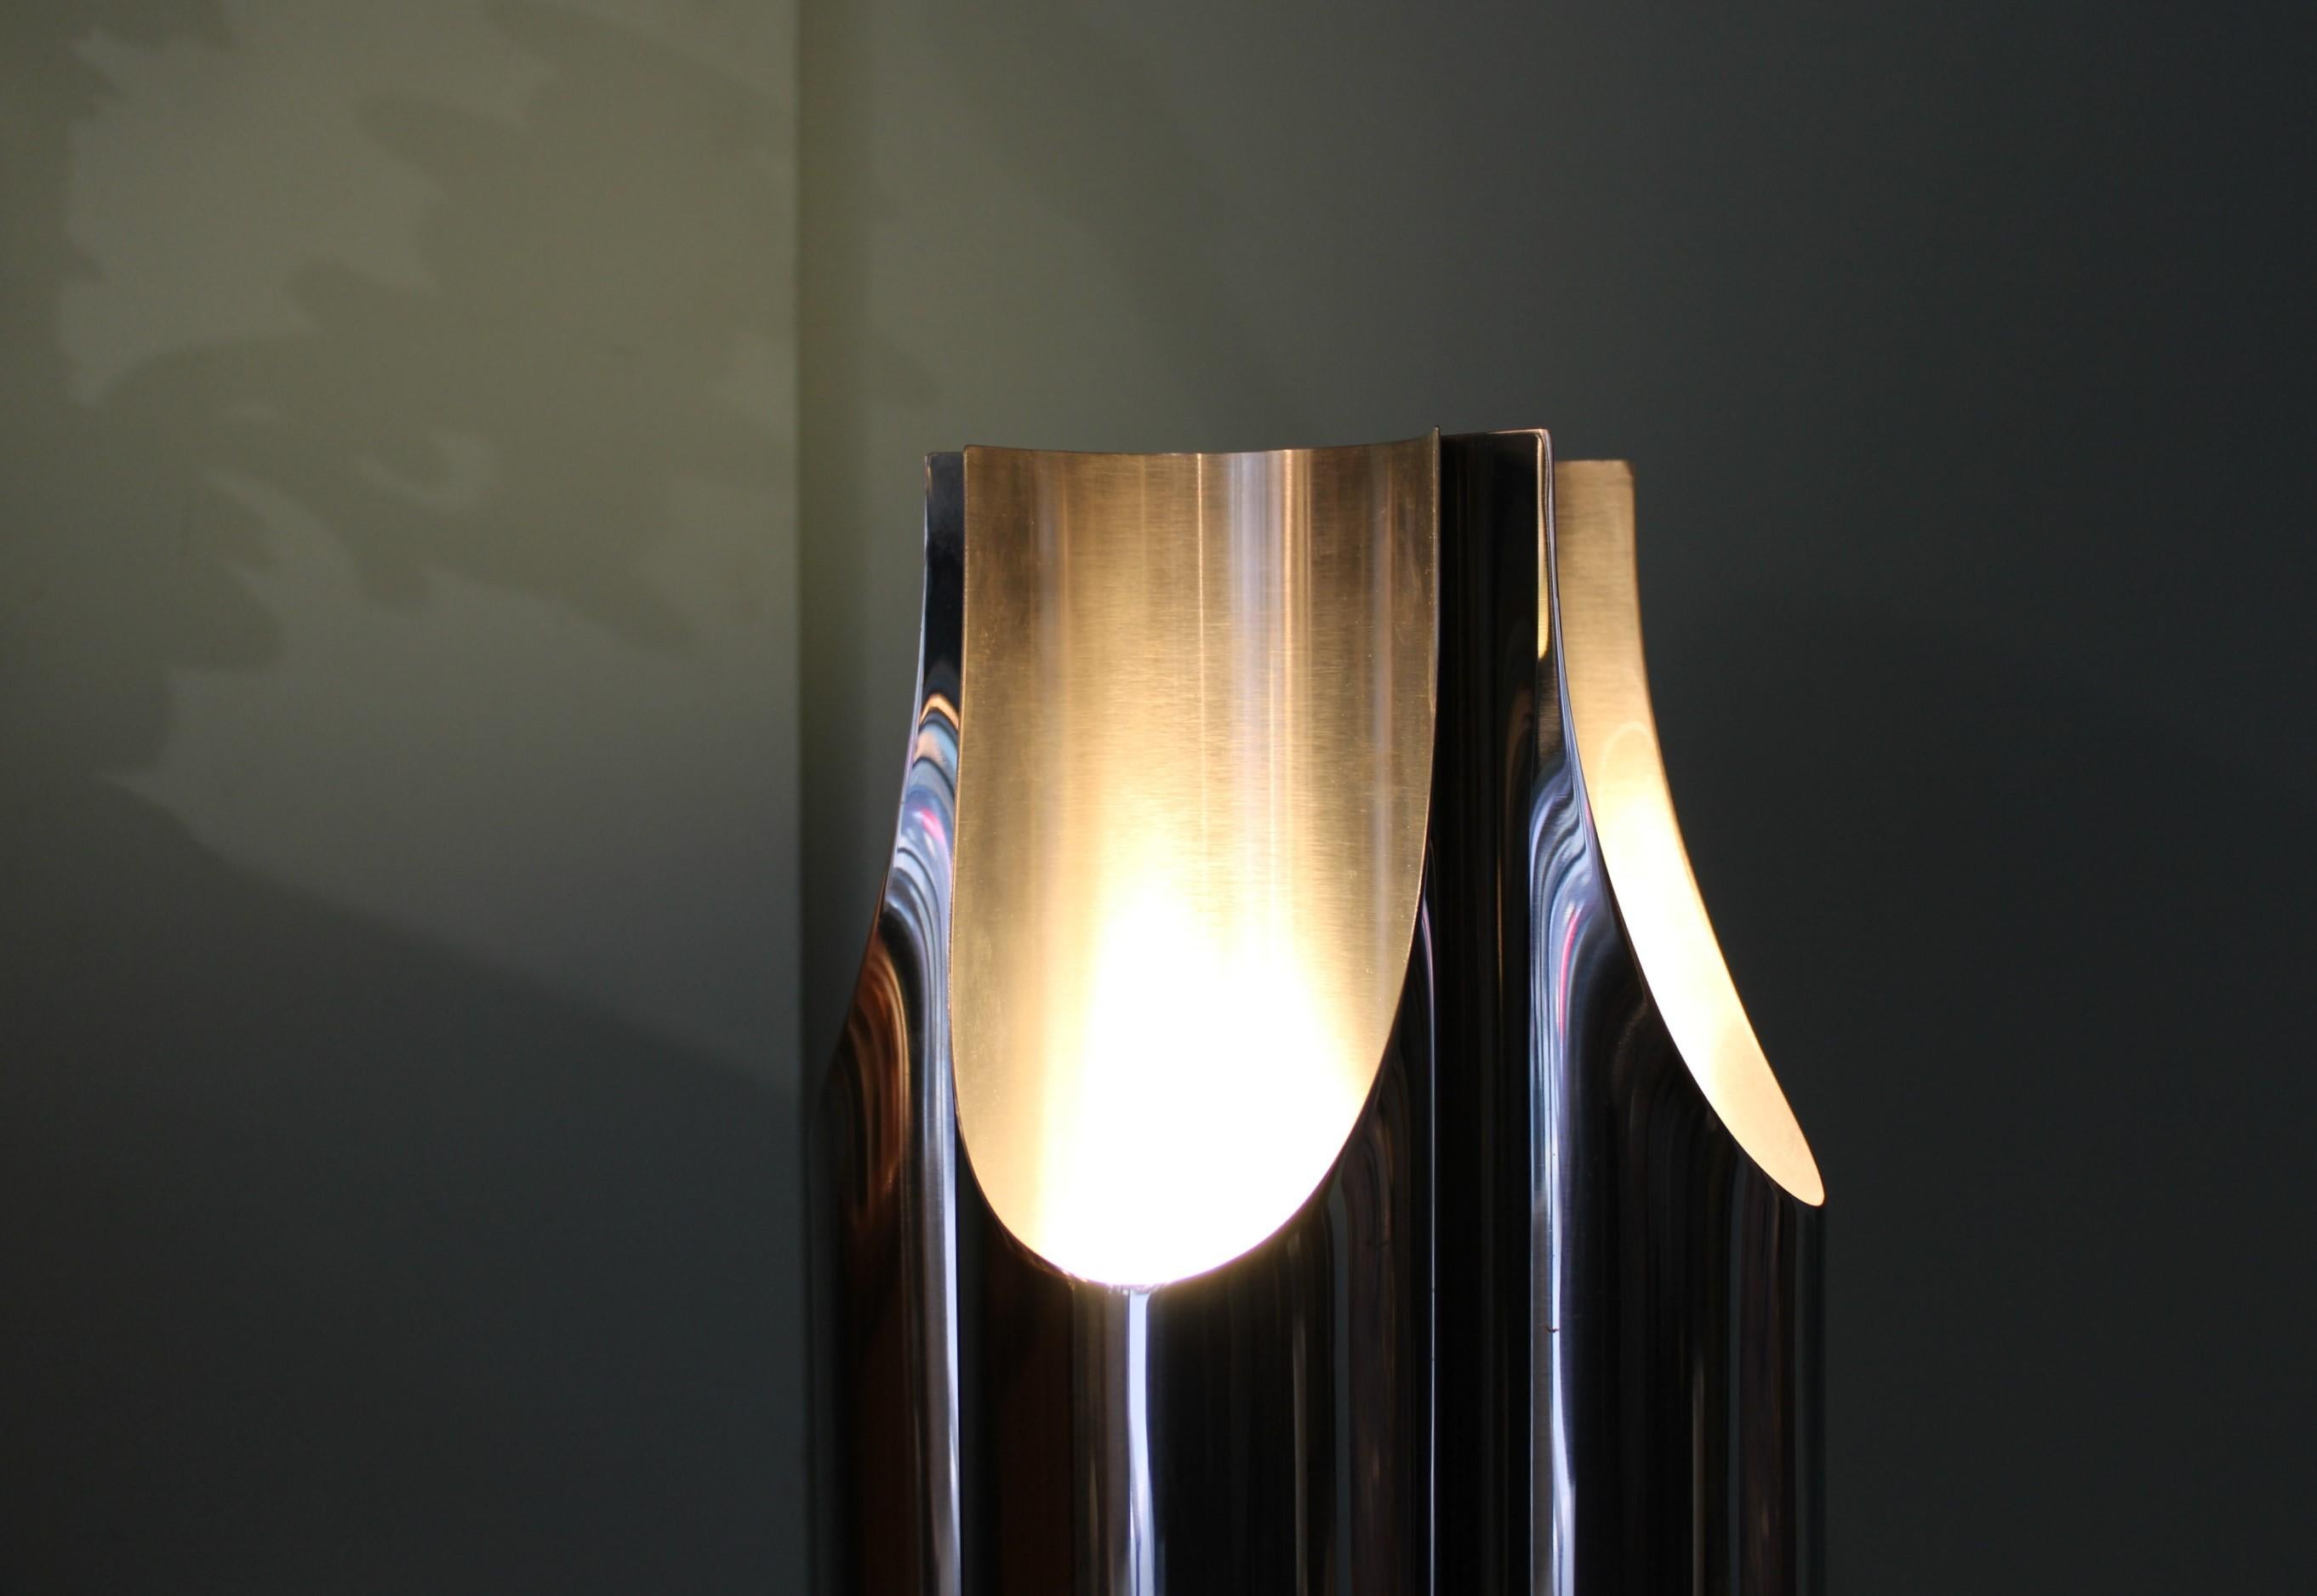 Mid-Century Modern “Orgue” lamp by Maison Charles, France, circa 1970